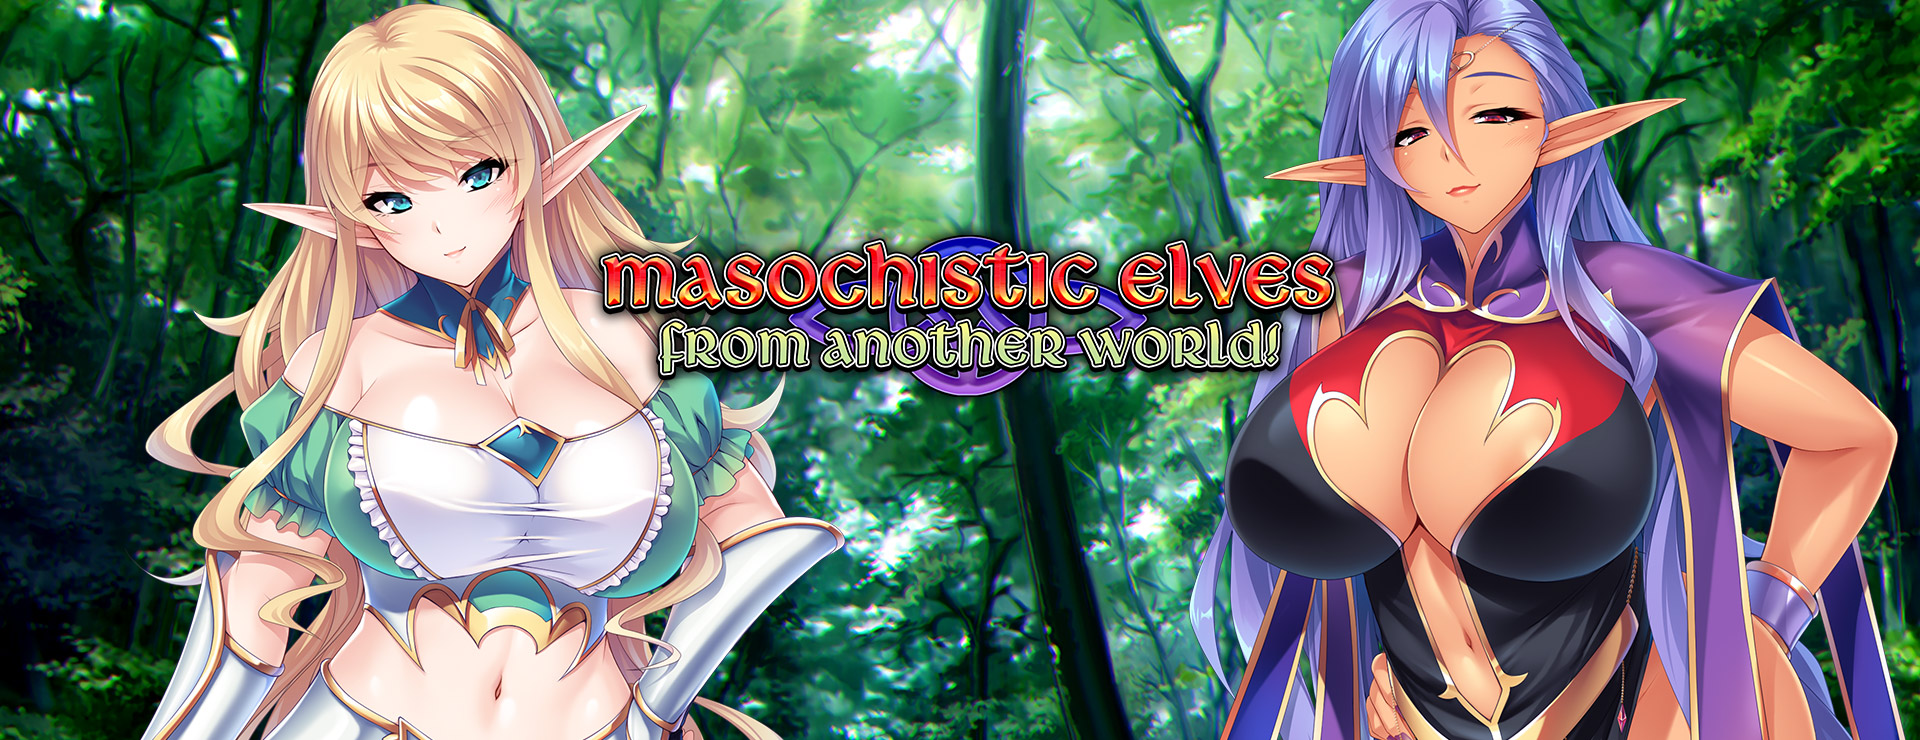 Masochistic Elves from Another World - 虚拟小说 遊戲